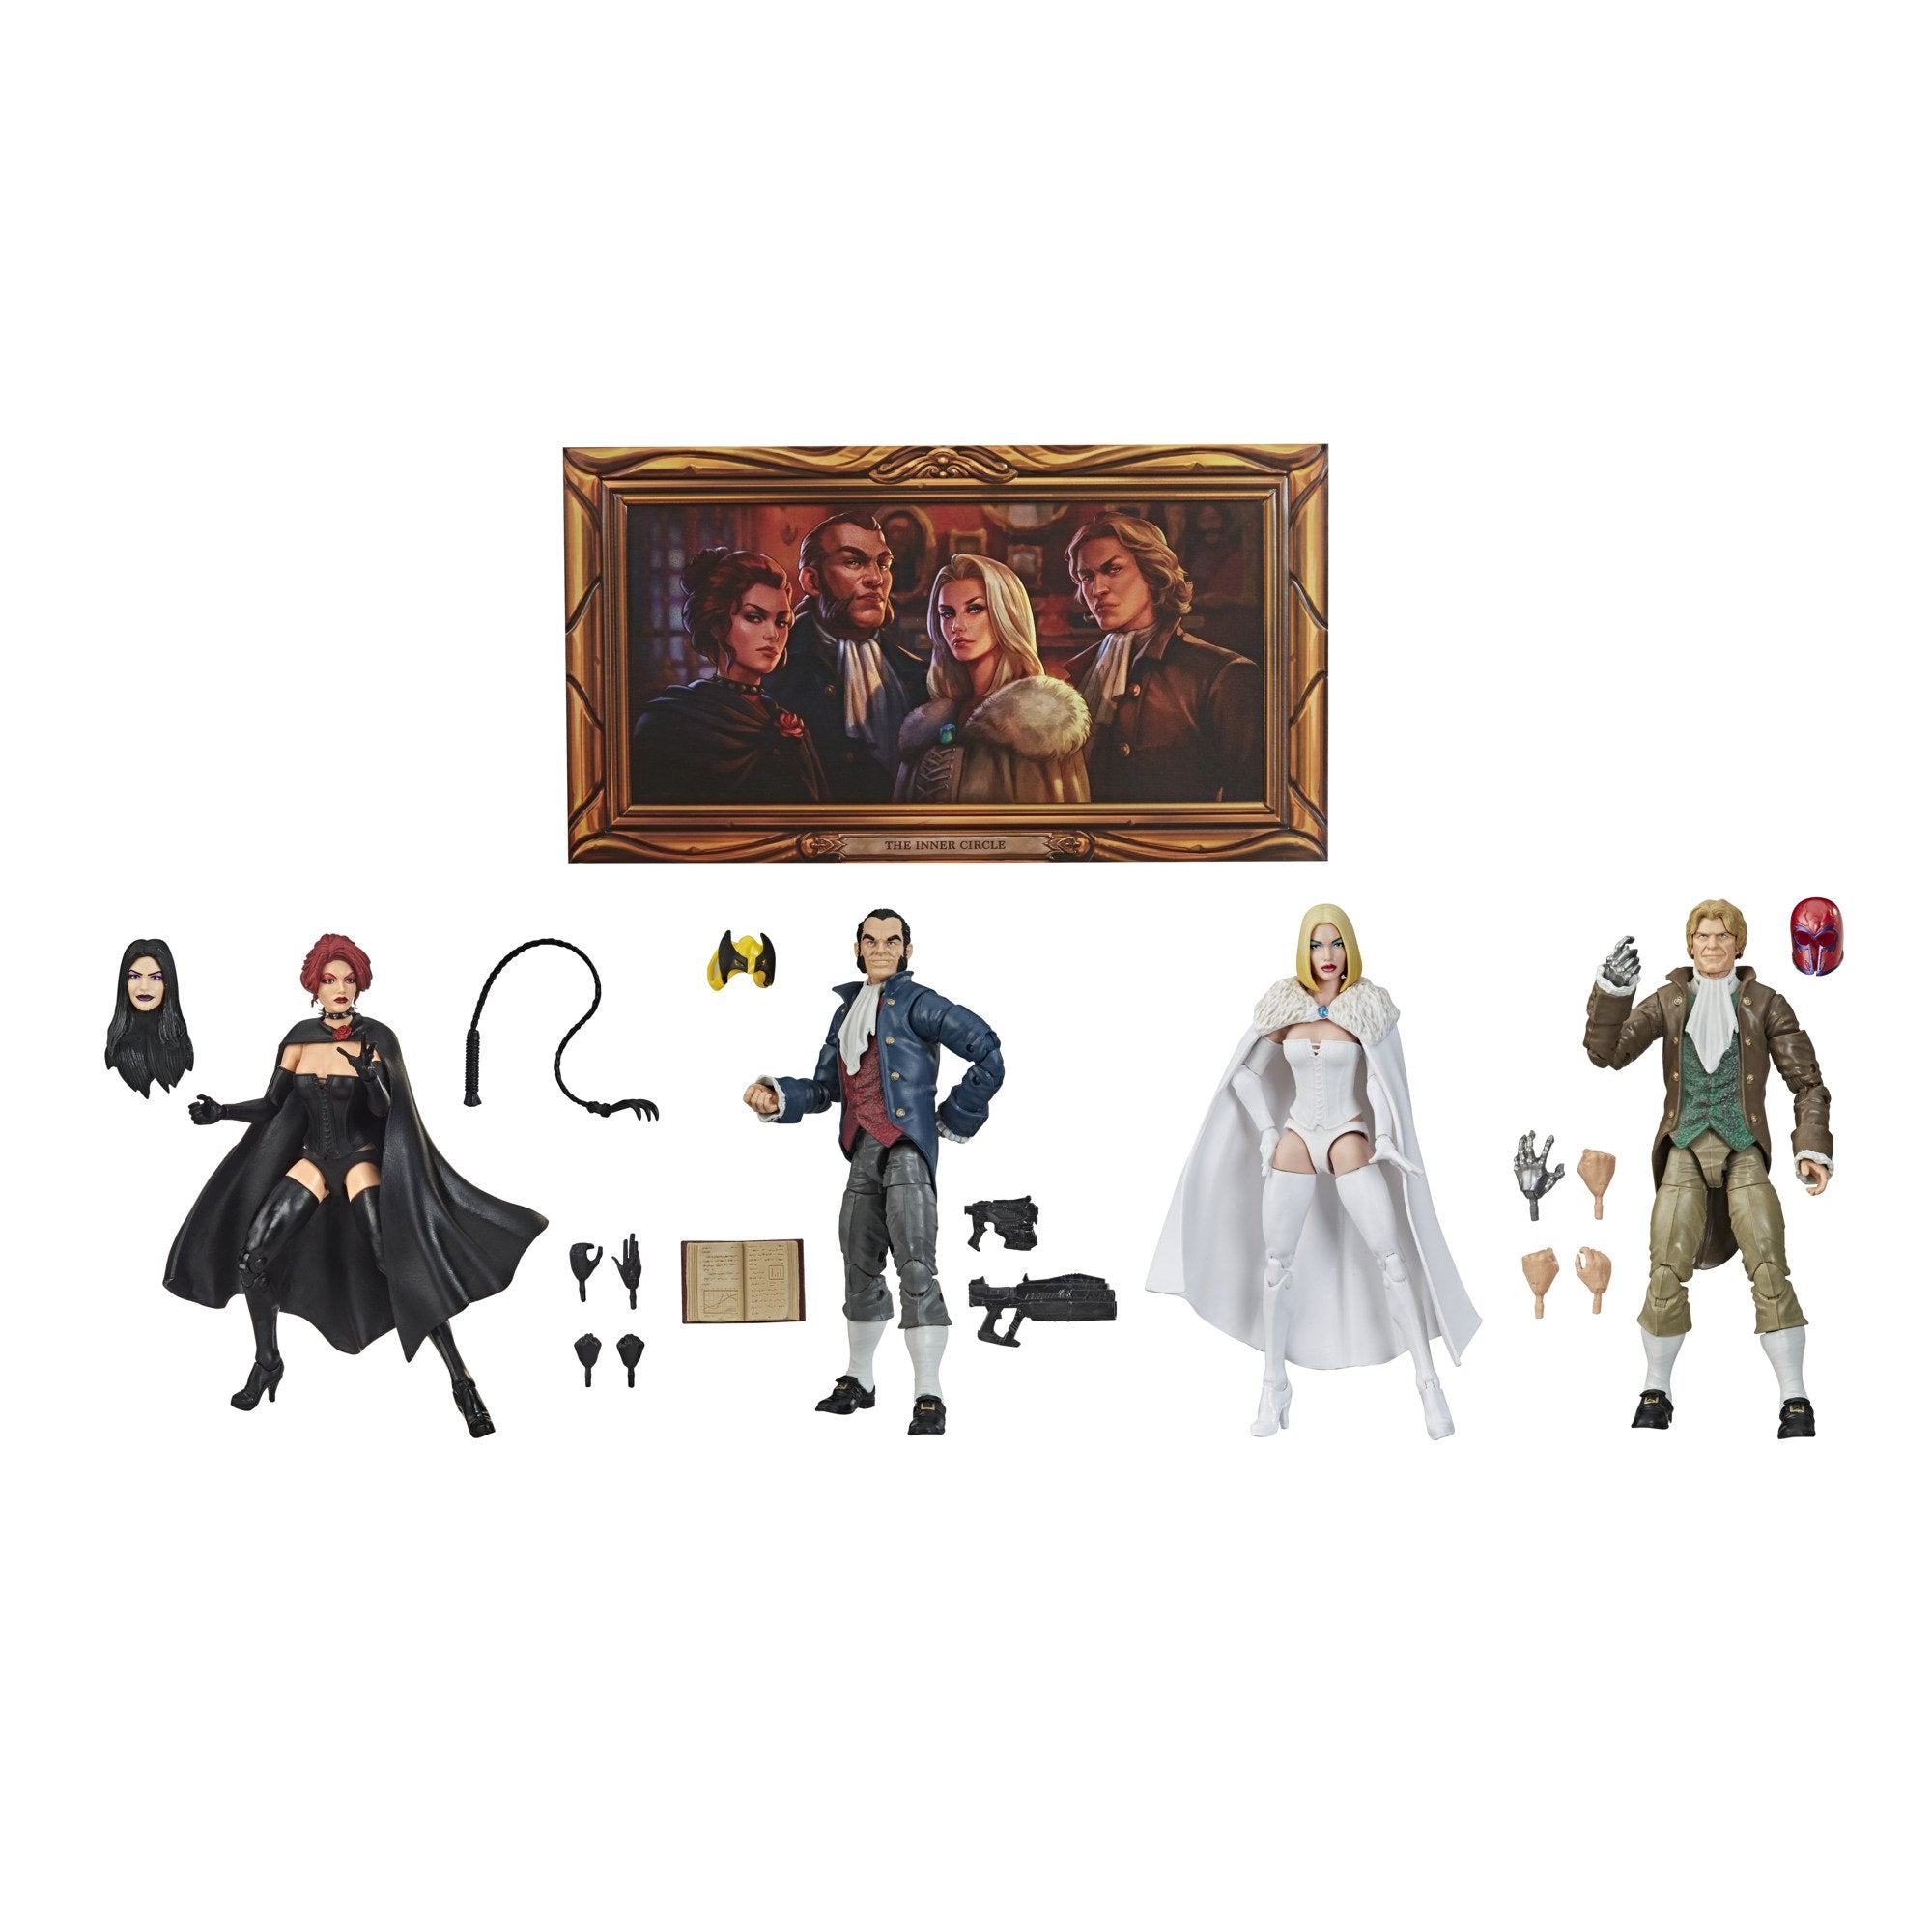 Marvel Legends Series 6" Hellfire Club Collection SDCC Exclusive